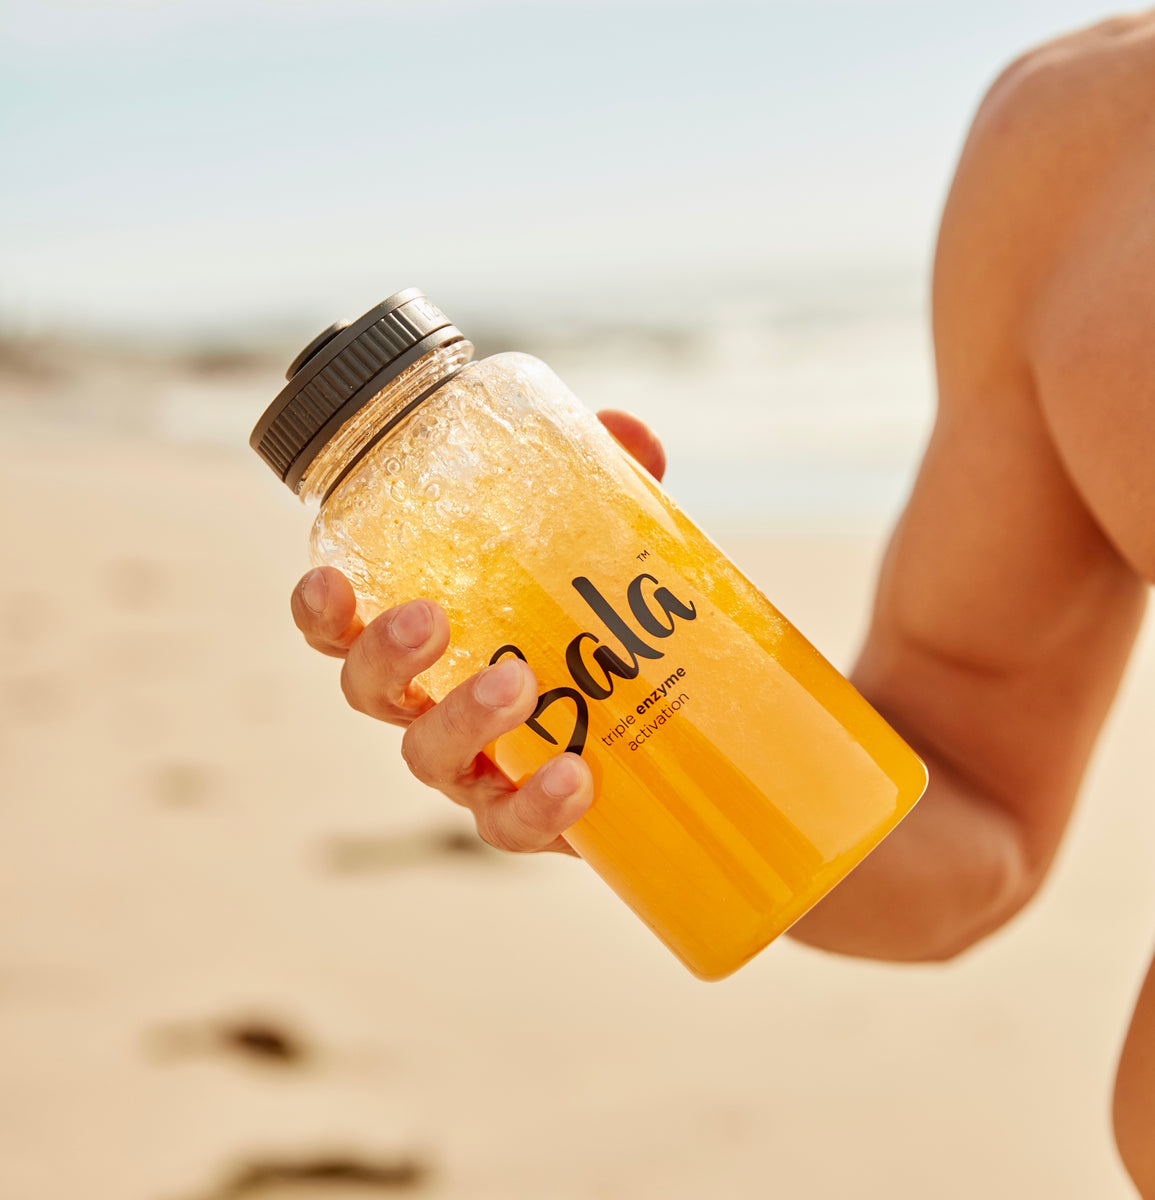 A person holding a 34oz bottle of "The Bala Bottle" from Bala Enzyme with an orange beverage on a sunny beach, the clear, BPA-free container catching the sunlight.